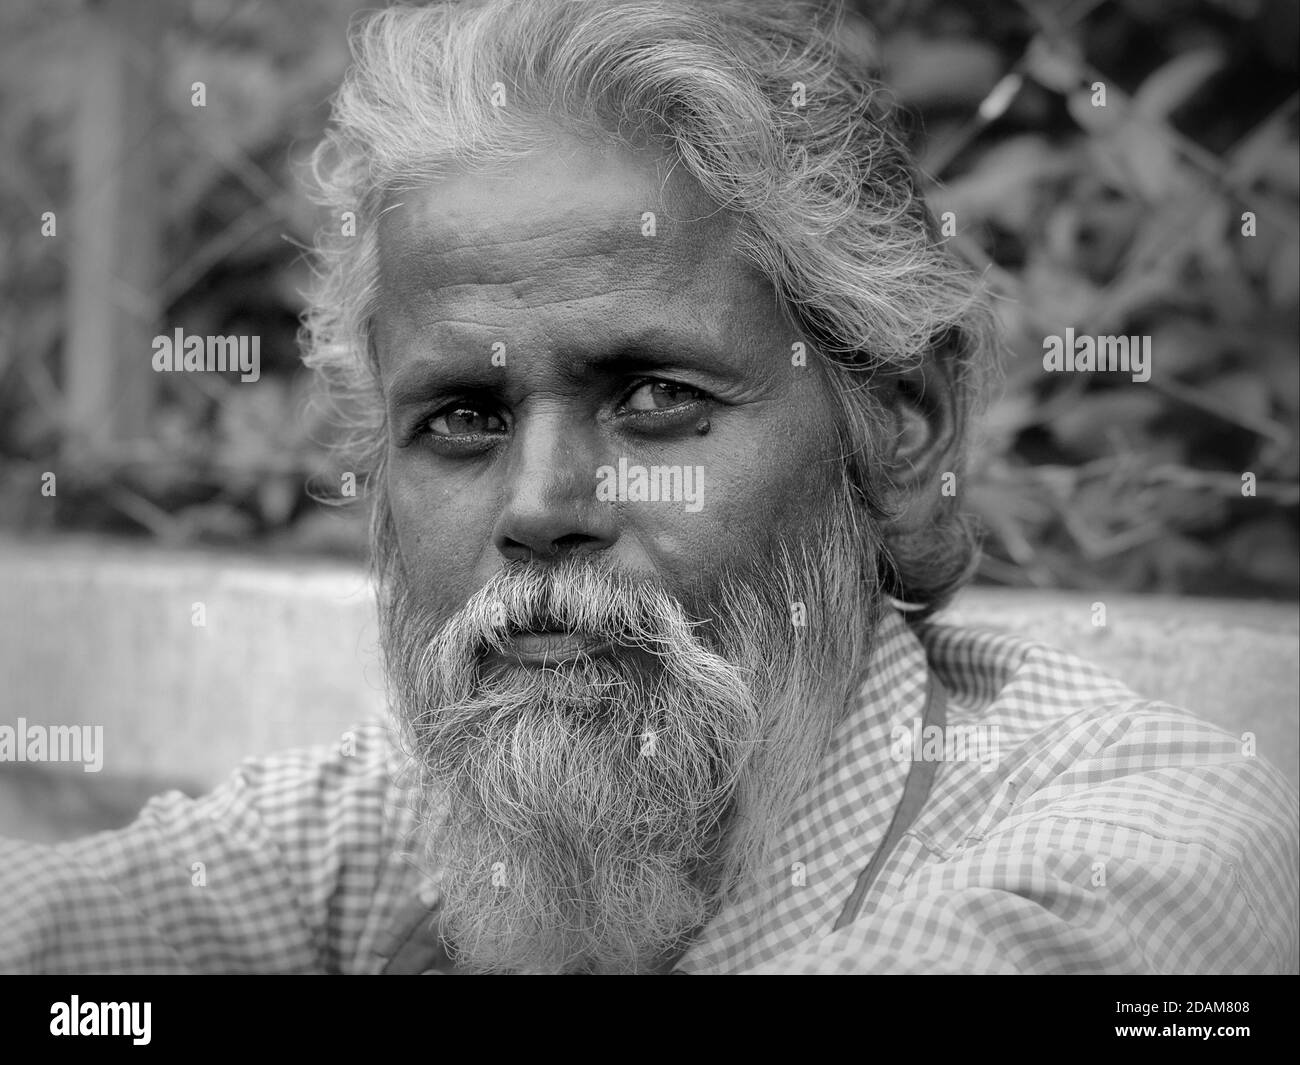 Middle-aged Indian migrant labourer with full beard sits by the roadside, waits for a daily job and poses for the camera. Stock Photo